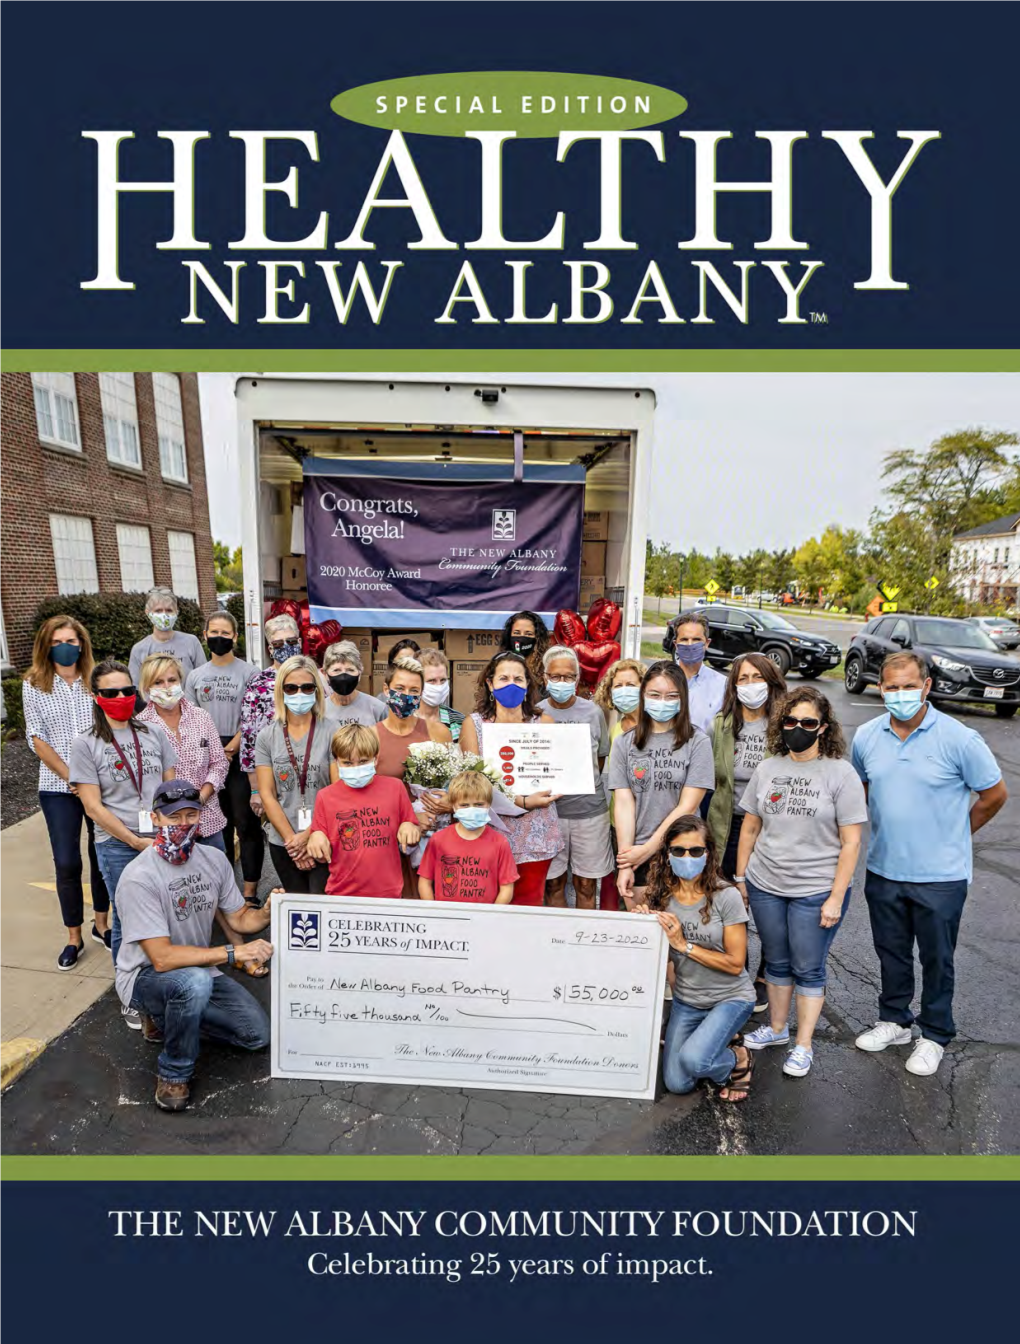 View Or Download the Special Edition of Healthy New Albany Magazine Celebrating the Foundation's 25 Years